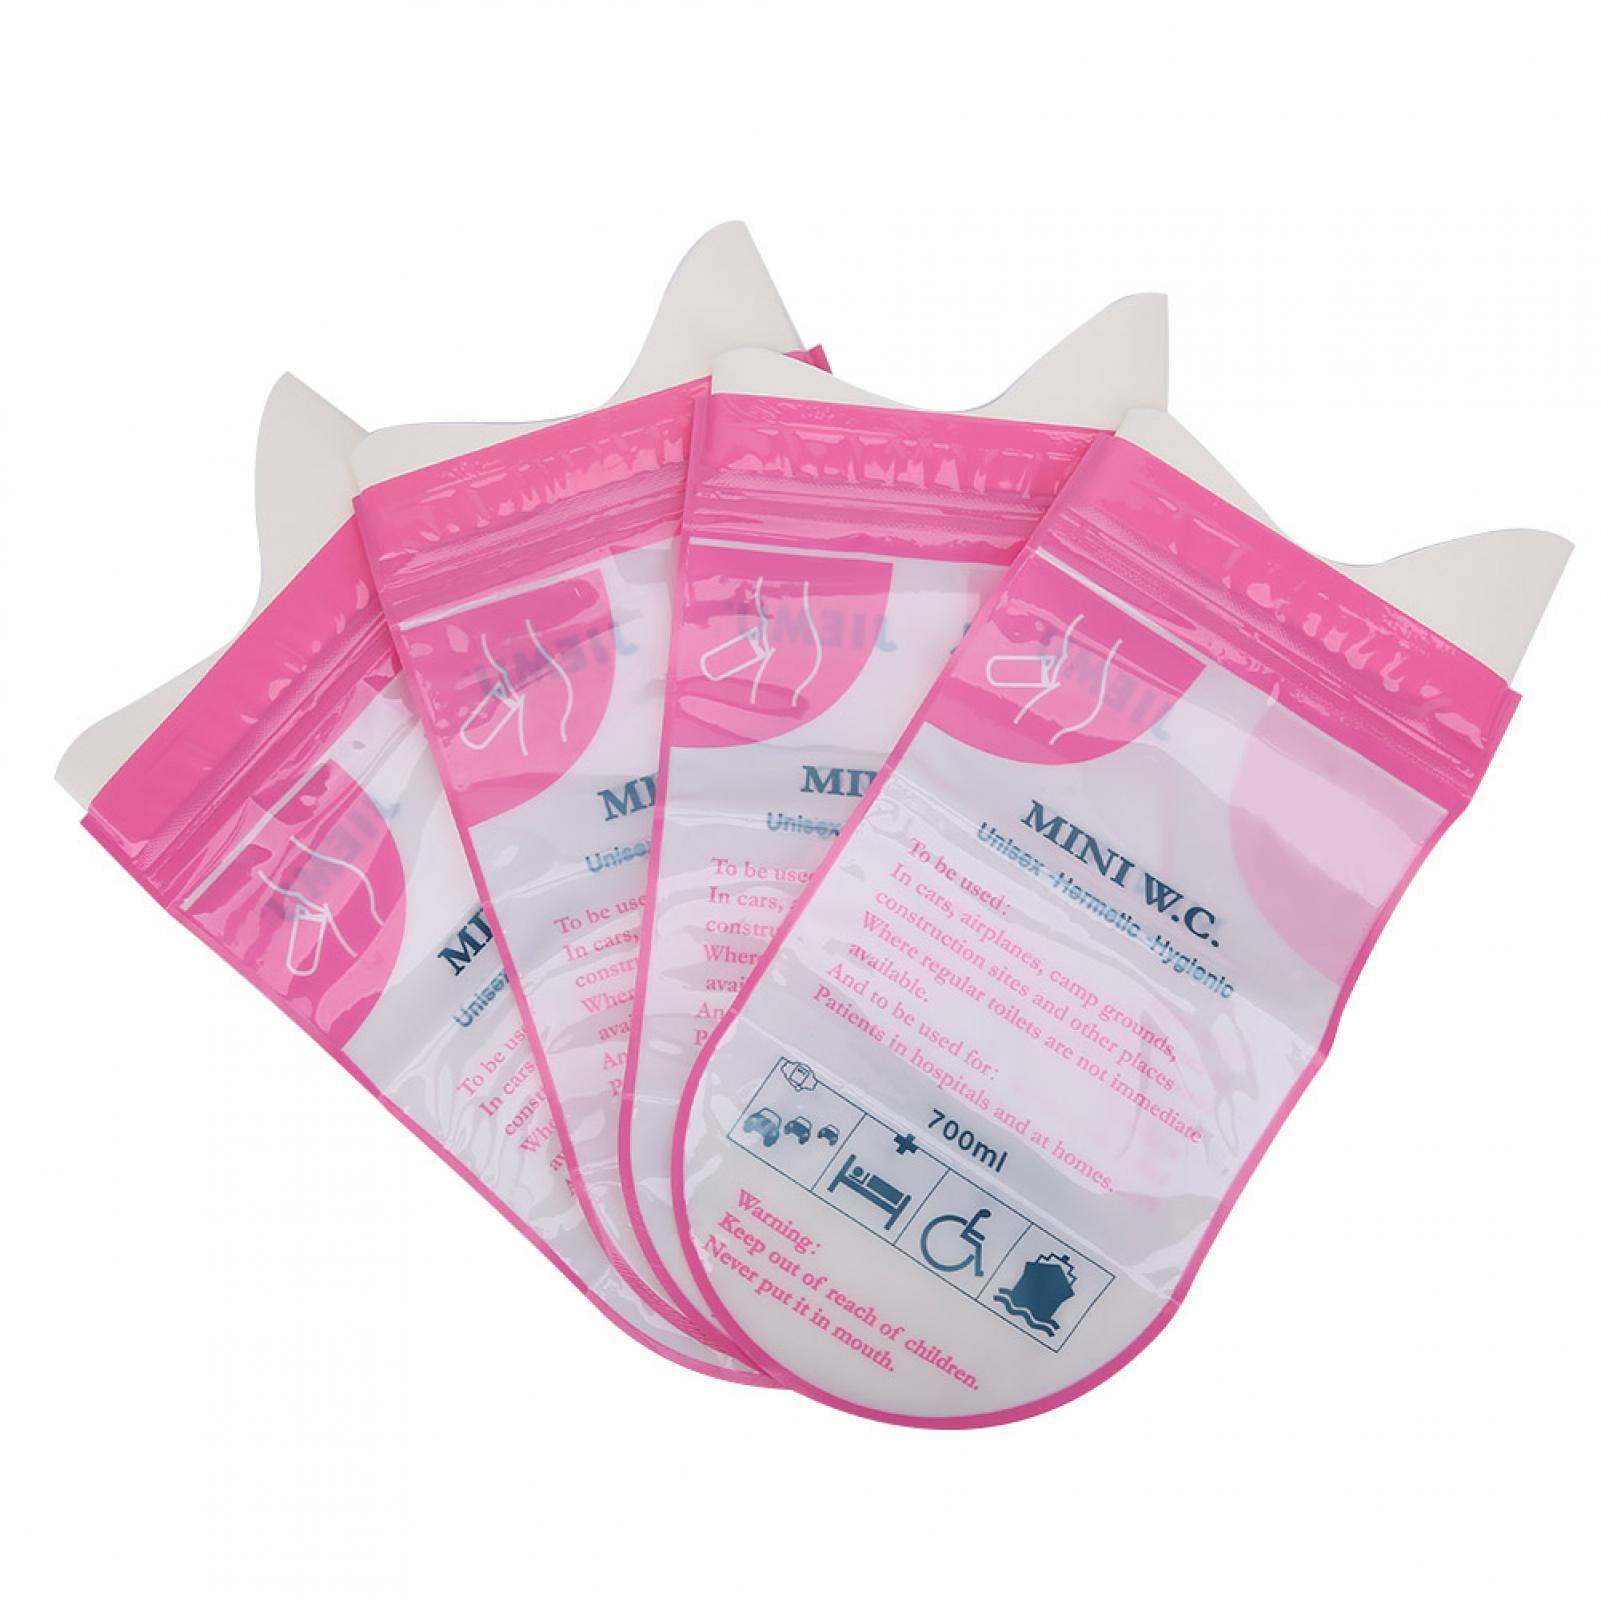 4x Pink Disposable 700CC Urine Storage Bags Emergency Toilets Travel For Unis_TI 